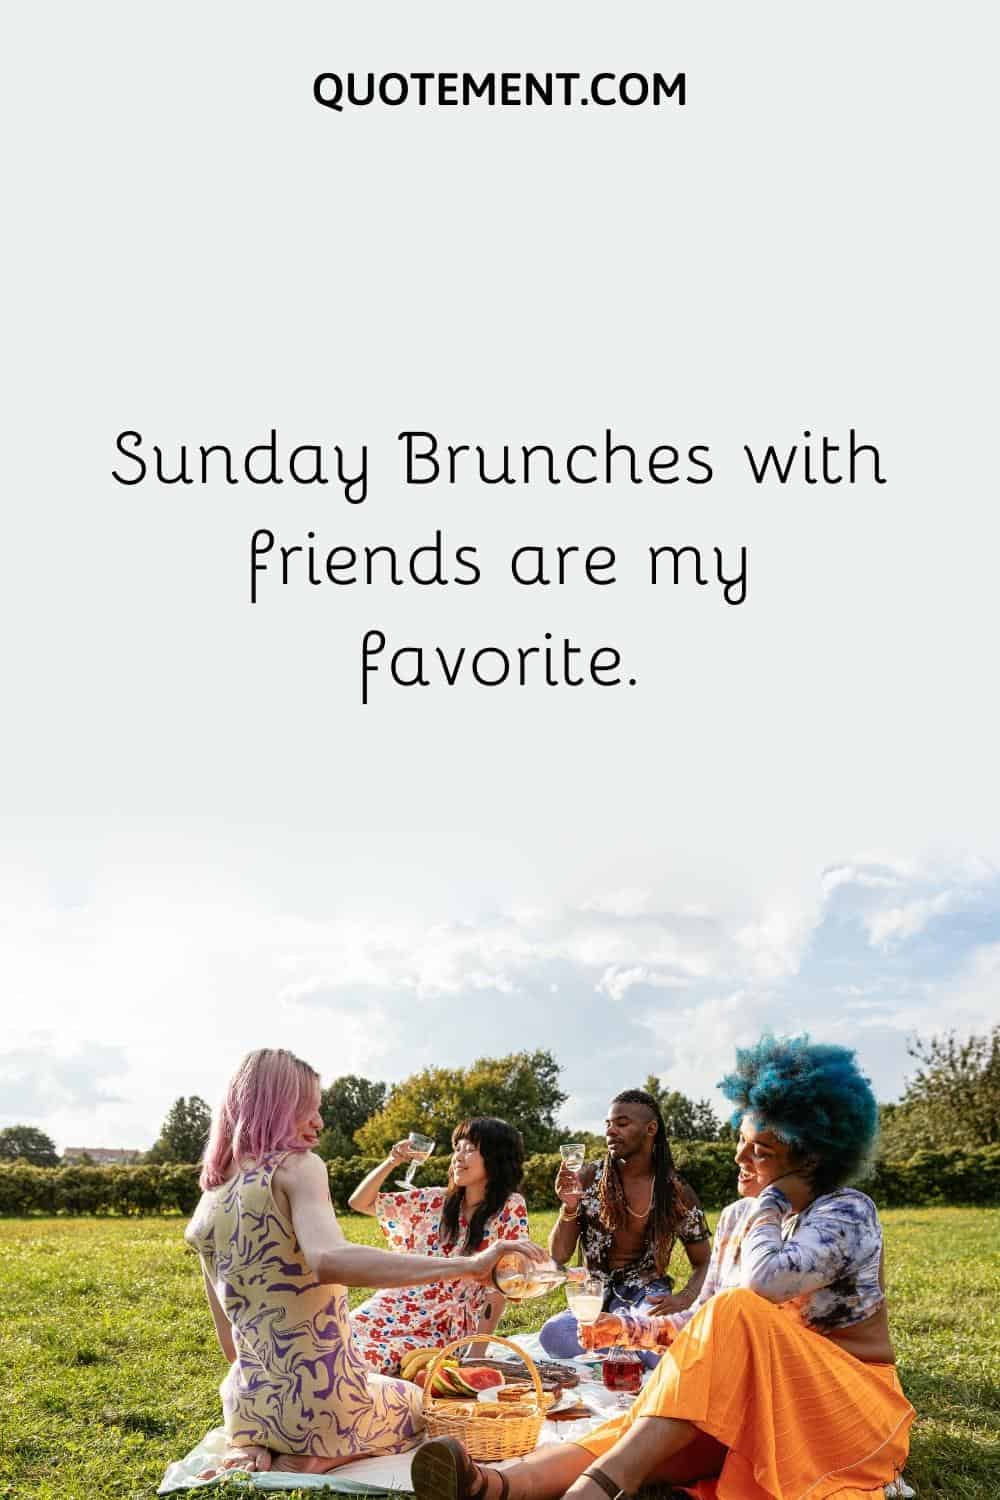 Sunday Brunches with friends are my favorite.